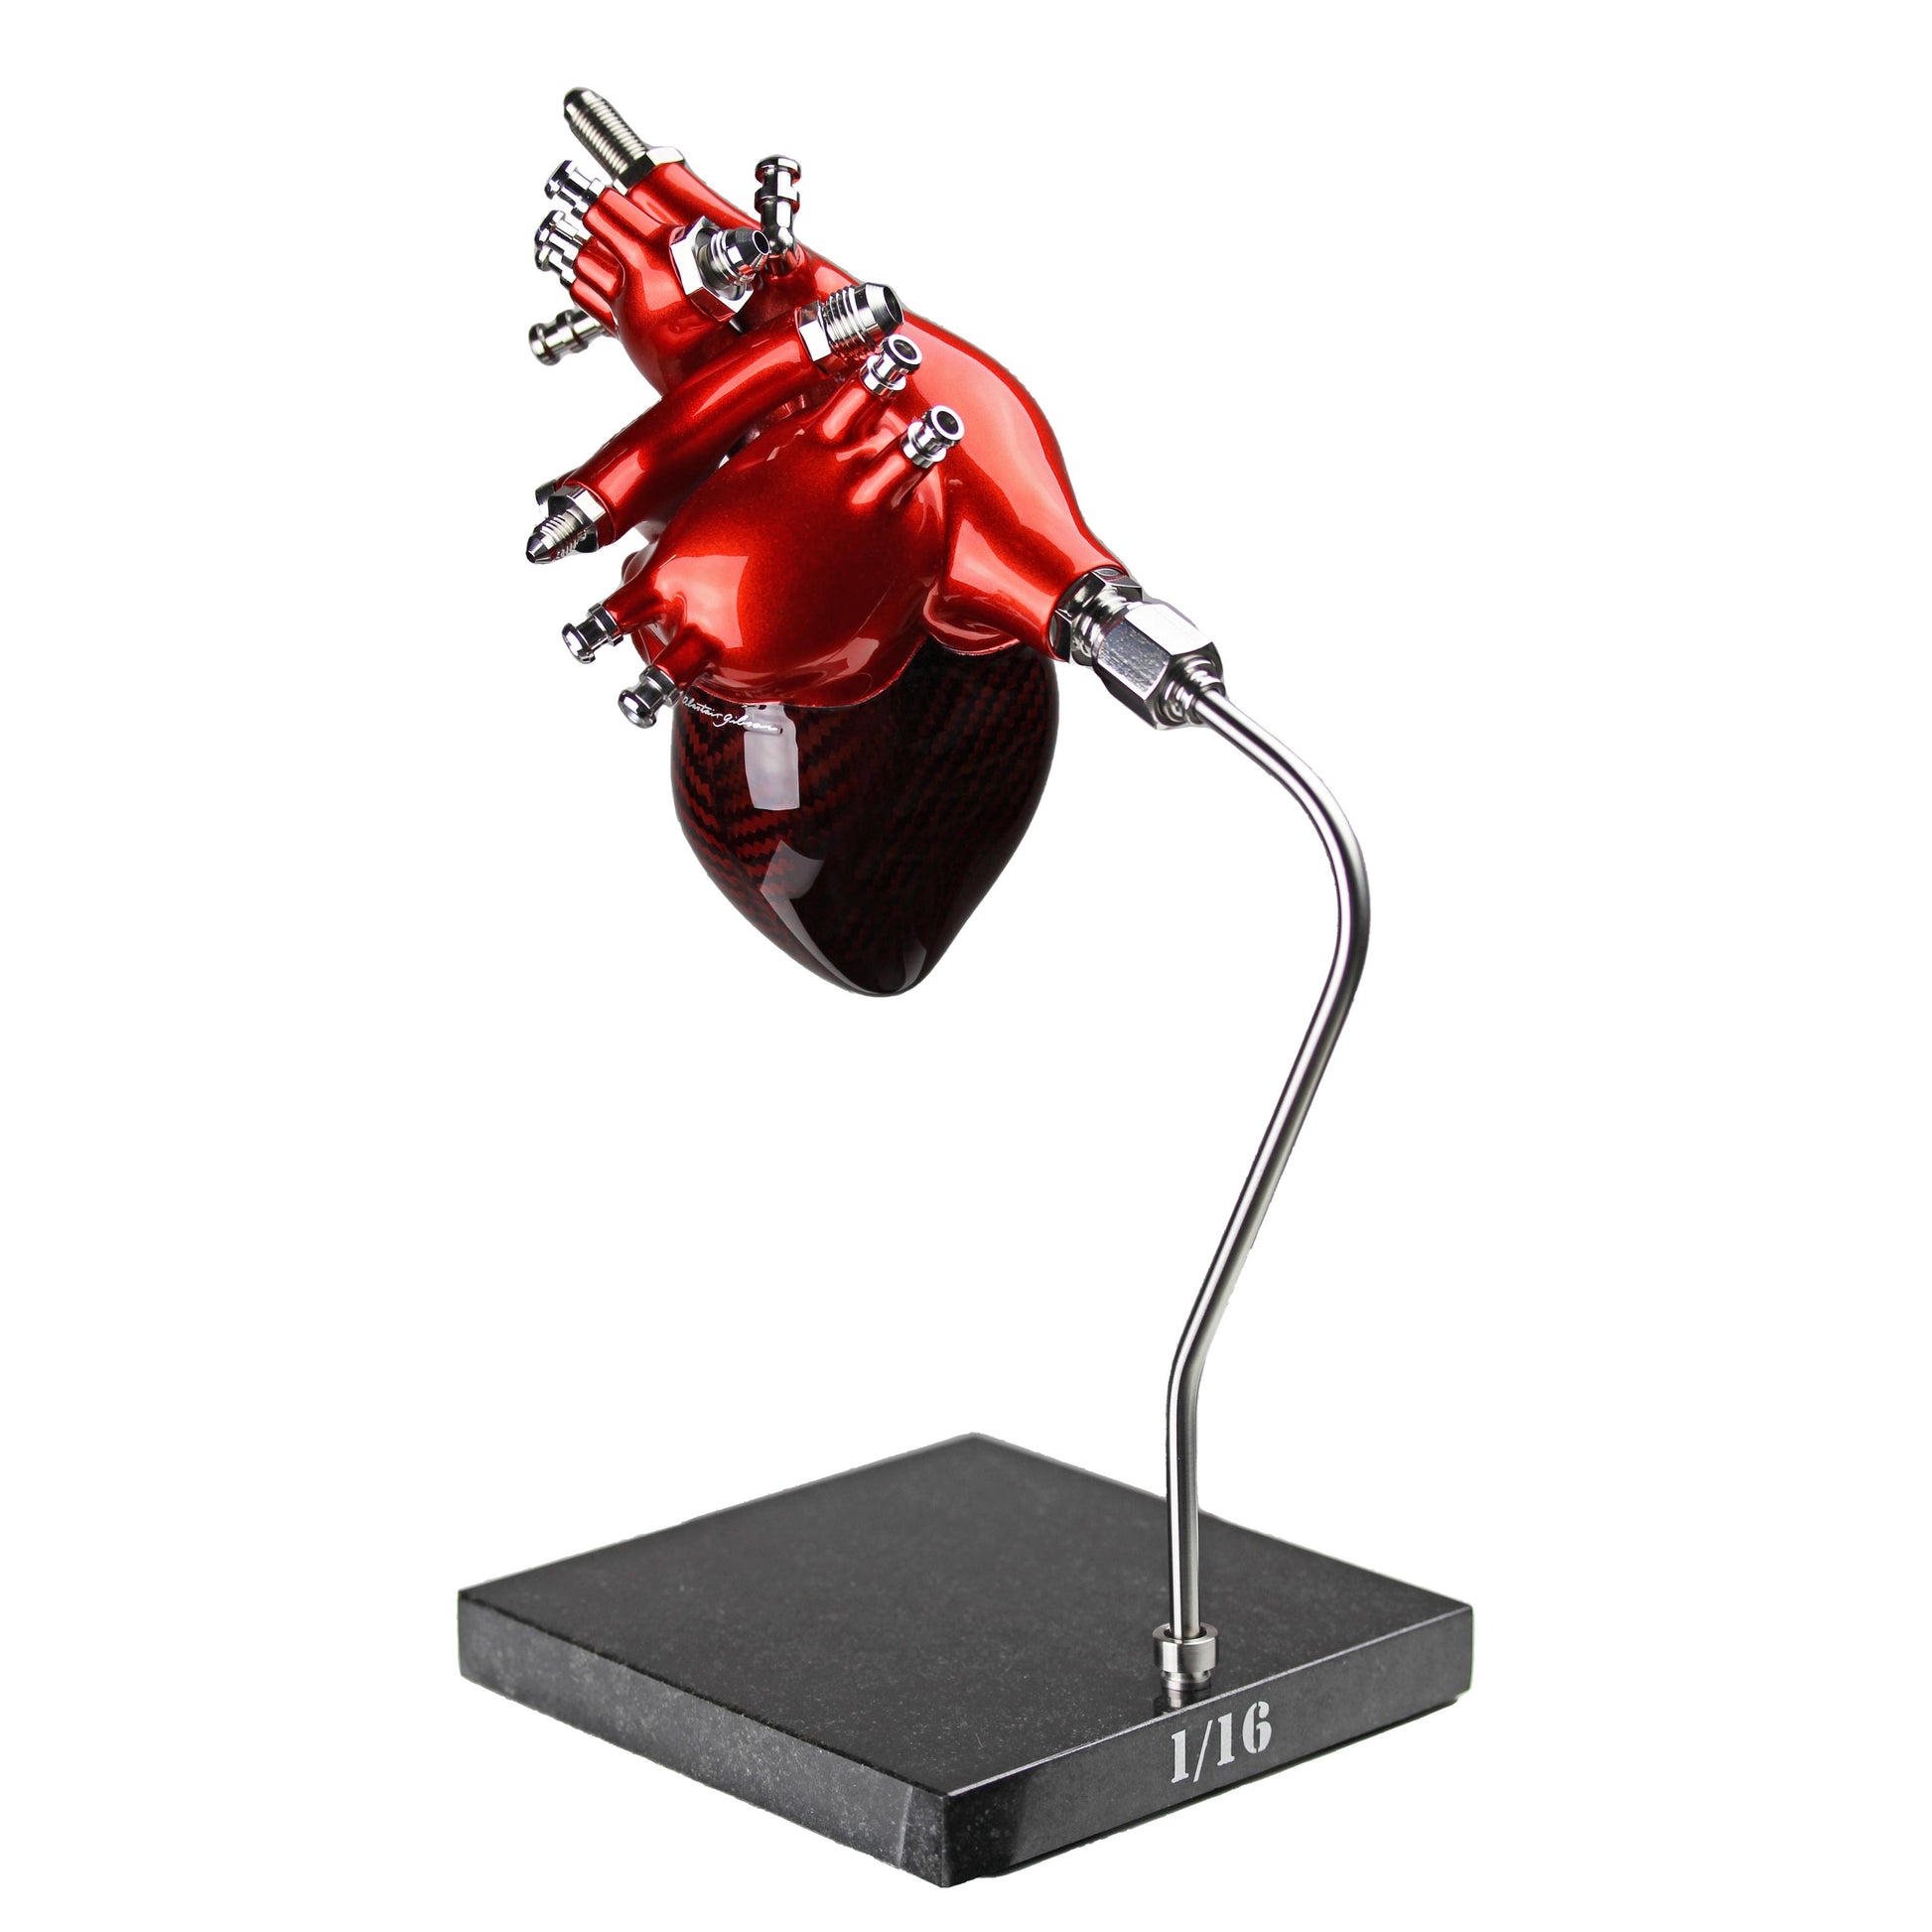 Carbon fibre Human Heart with red tint and red painted detail on a granite base